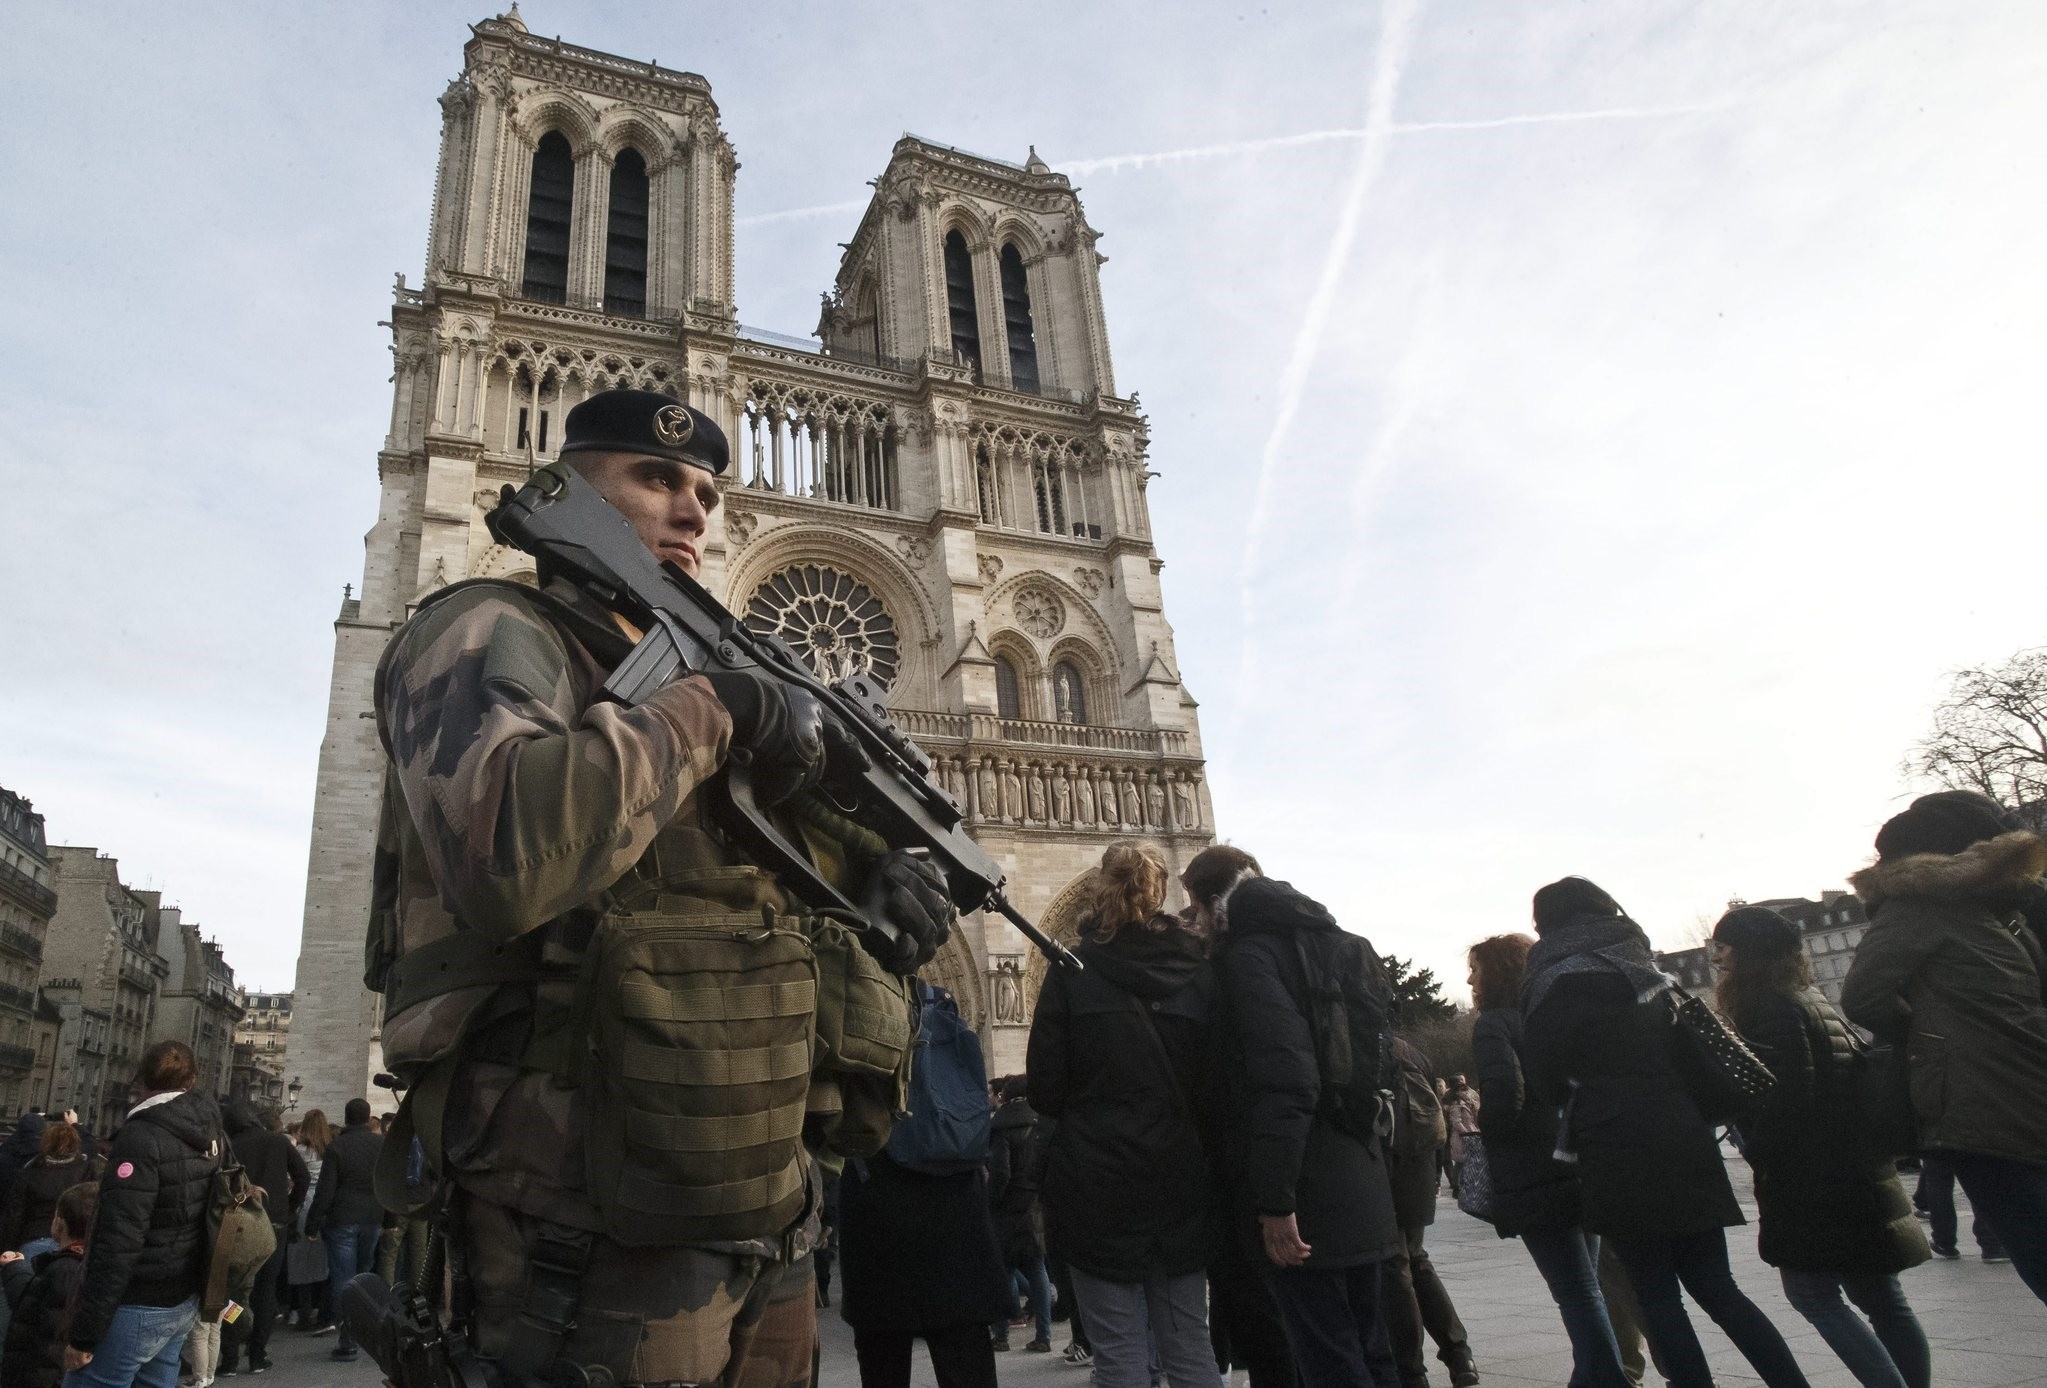 A soldier patrols at the Notre Dame cathedral in Paris, Dec. 30, 2015. (AP Photo)